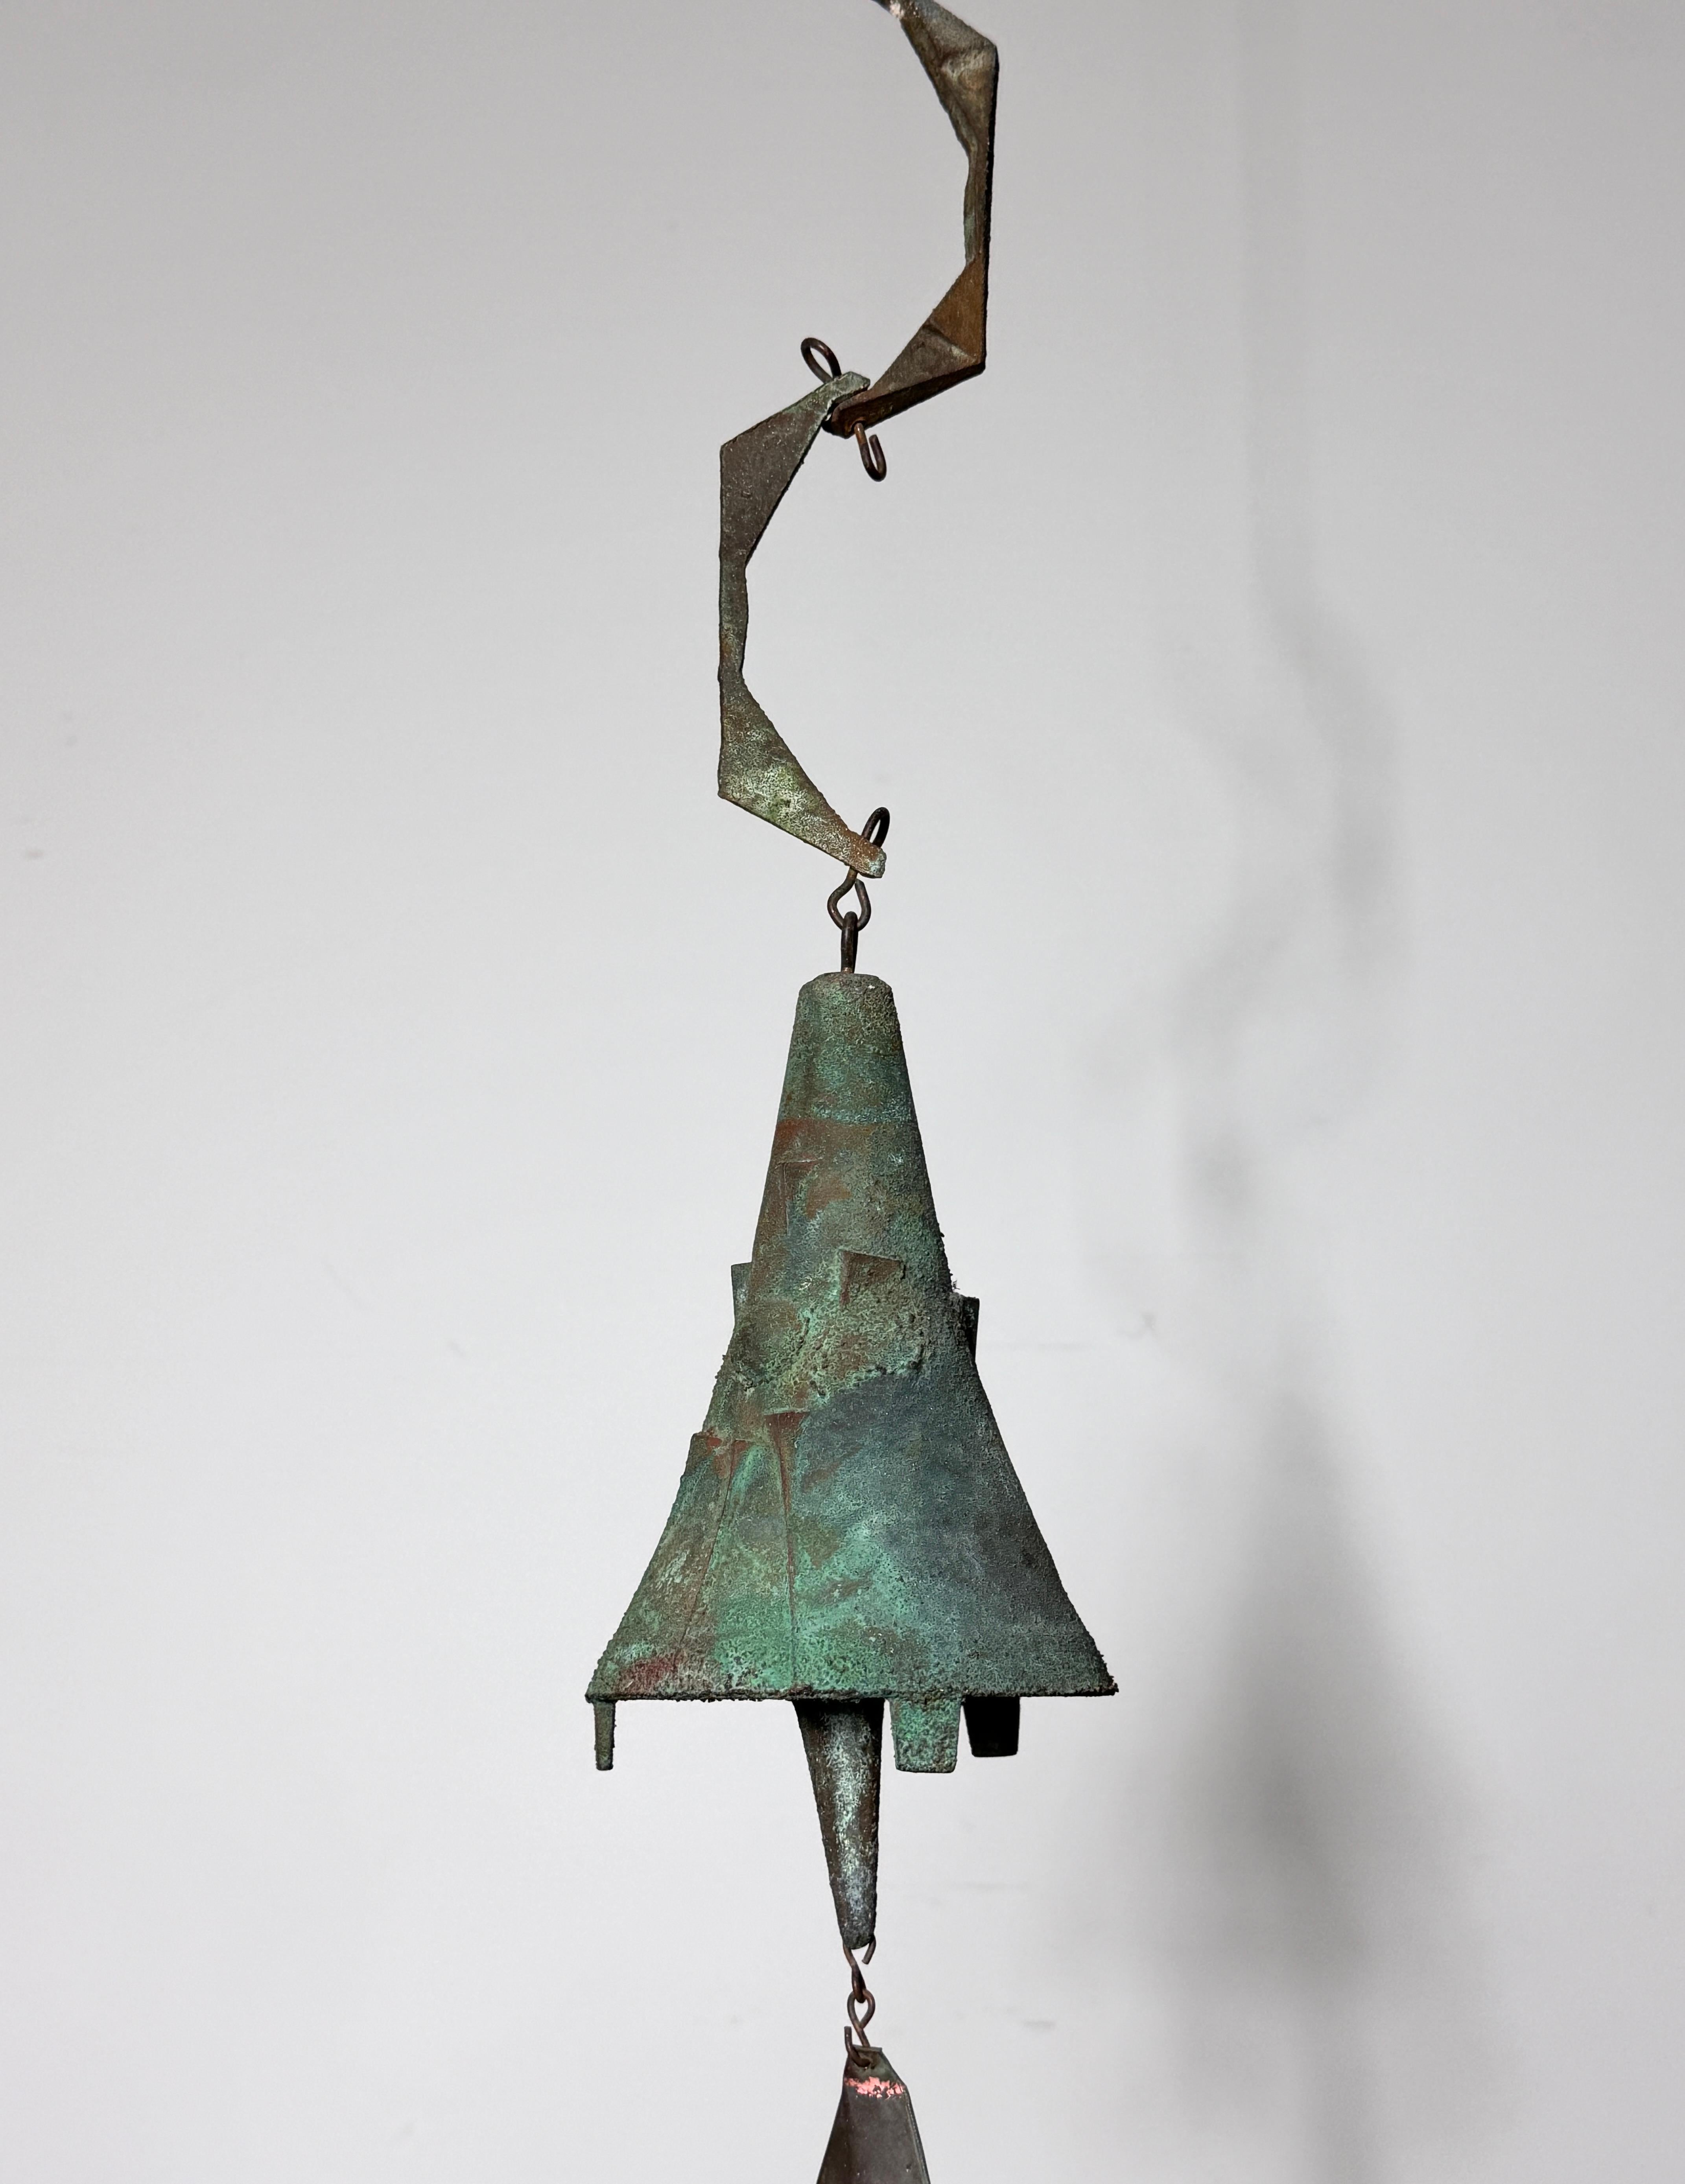 Early cast bronze brutalist wind bell by Paolo Soleri for Arcosanti 
Circa 1970s

Great form with uncommon modernist sun pattern exaggerated chain and original copper fin
Signed 

Overall height w/ chain 26 inches
Bell diameter 5 inches